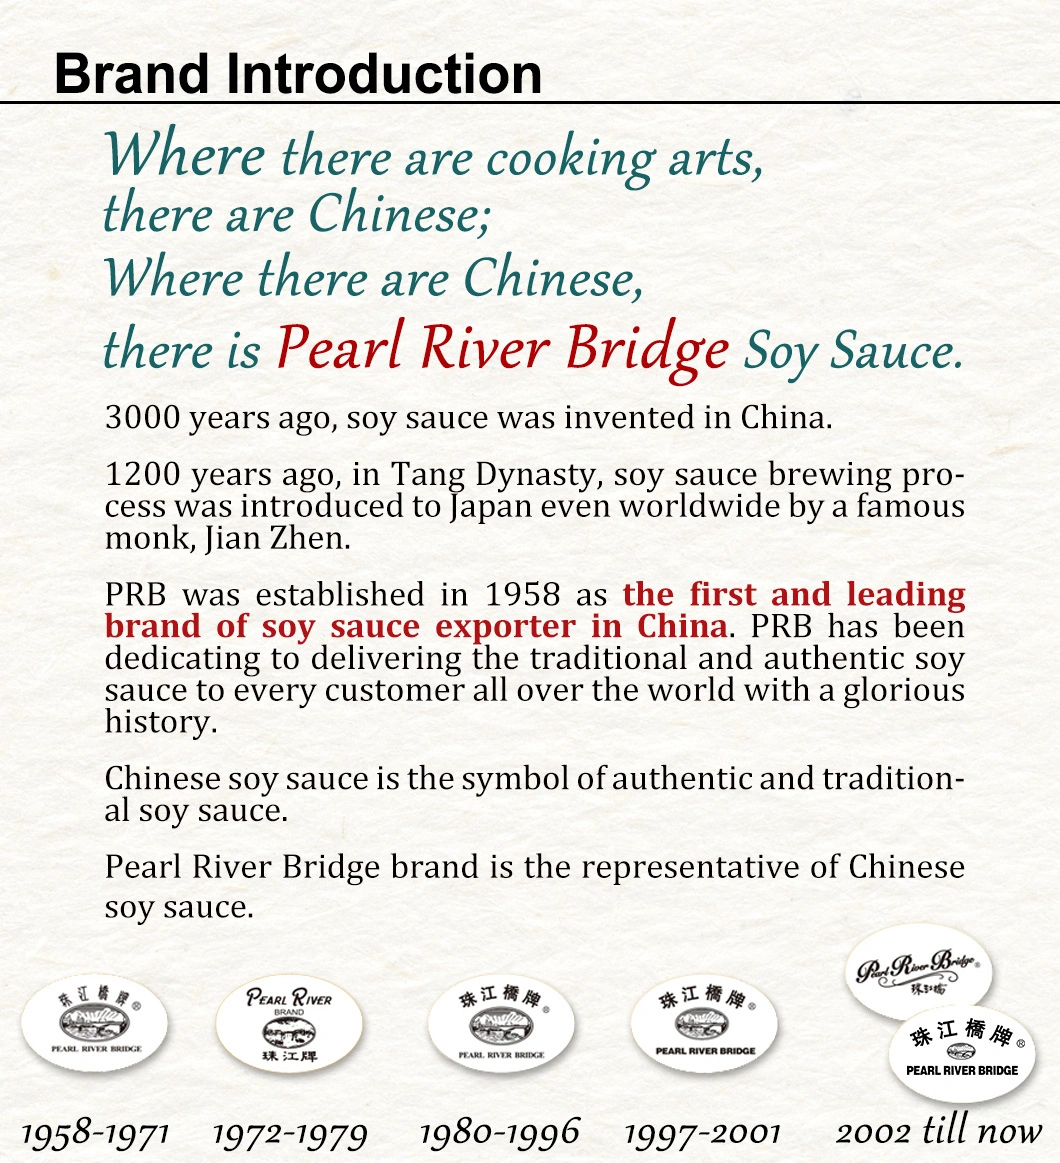 Pearl River Bridge Delicious Light Soy Sauce 1.9L Healthy and High Quality Food Additive